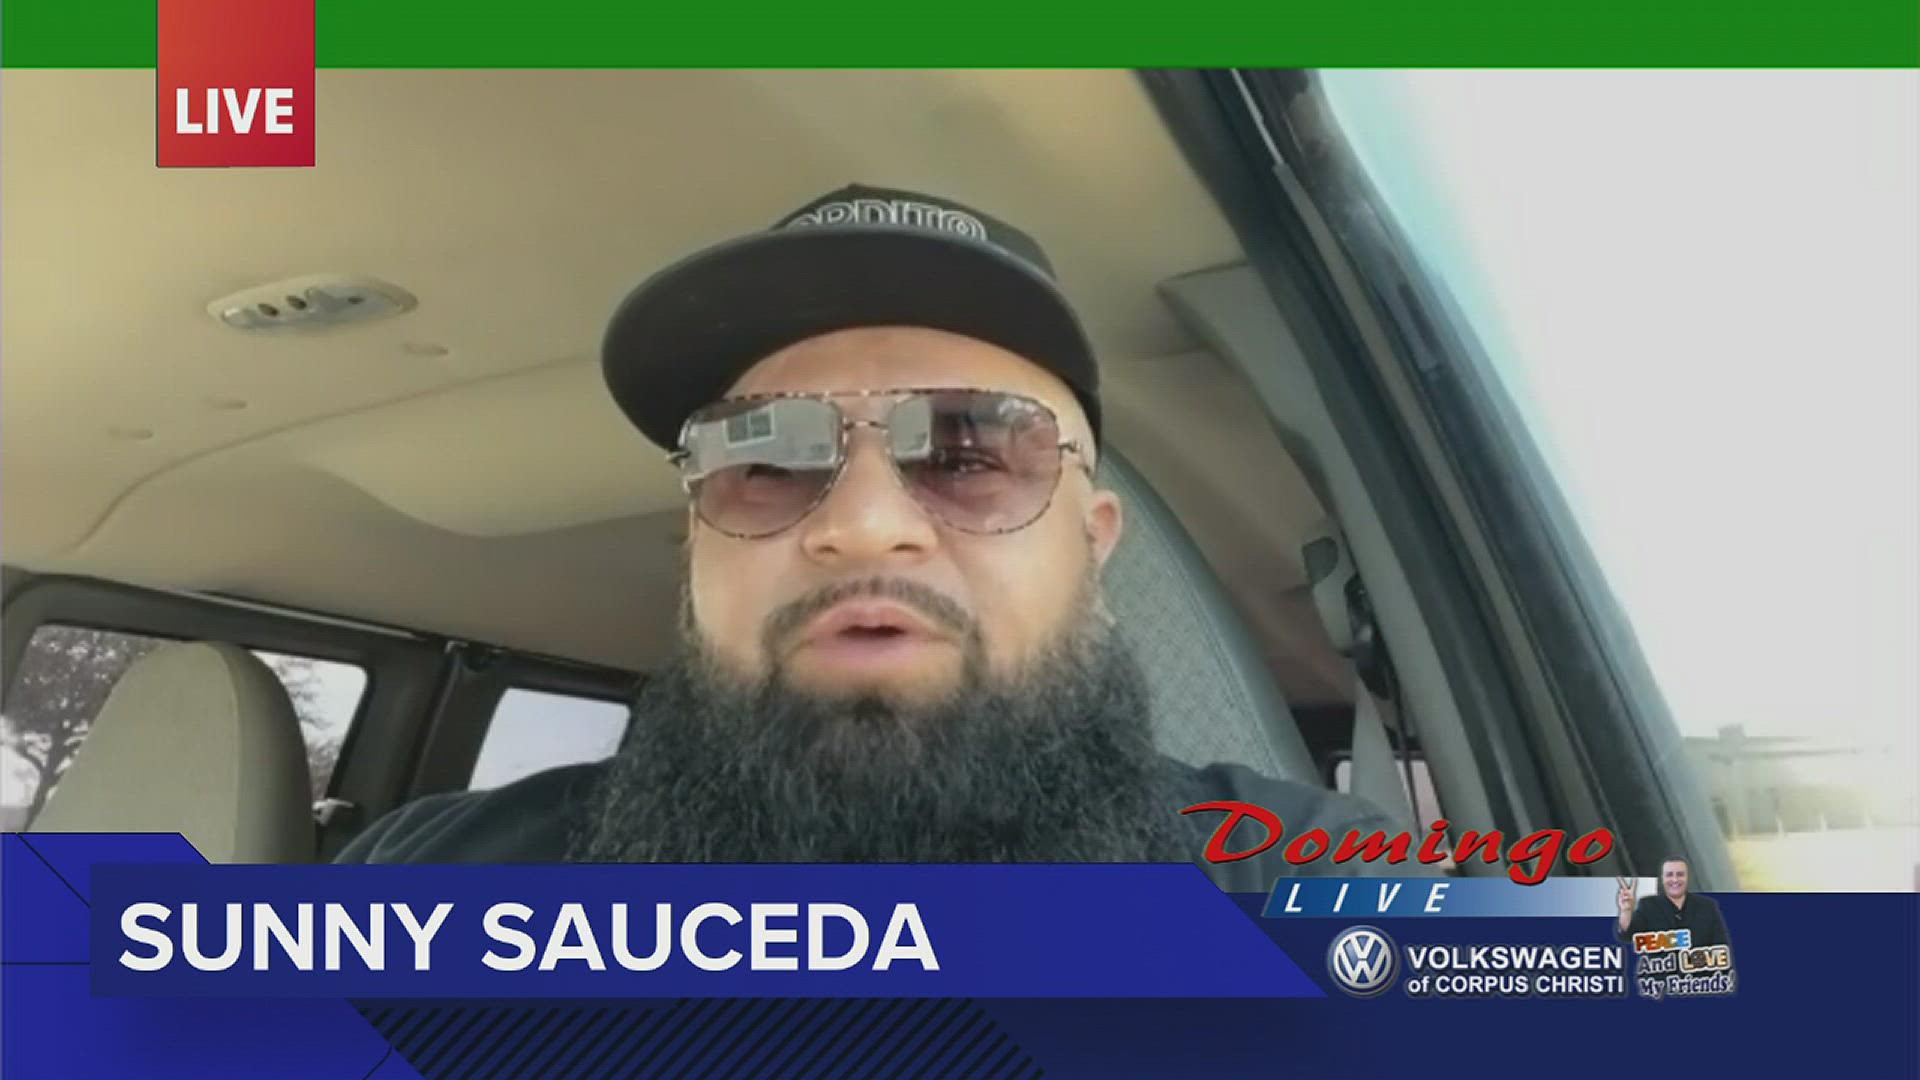 Tejano star Sunny Sauceda joined us live to share the heartfelt meaning behind his latest music video, "Niño."